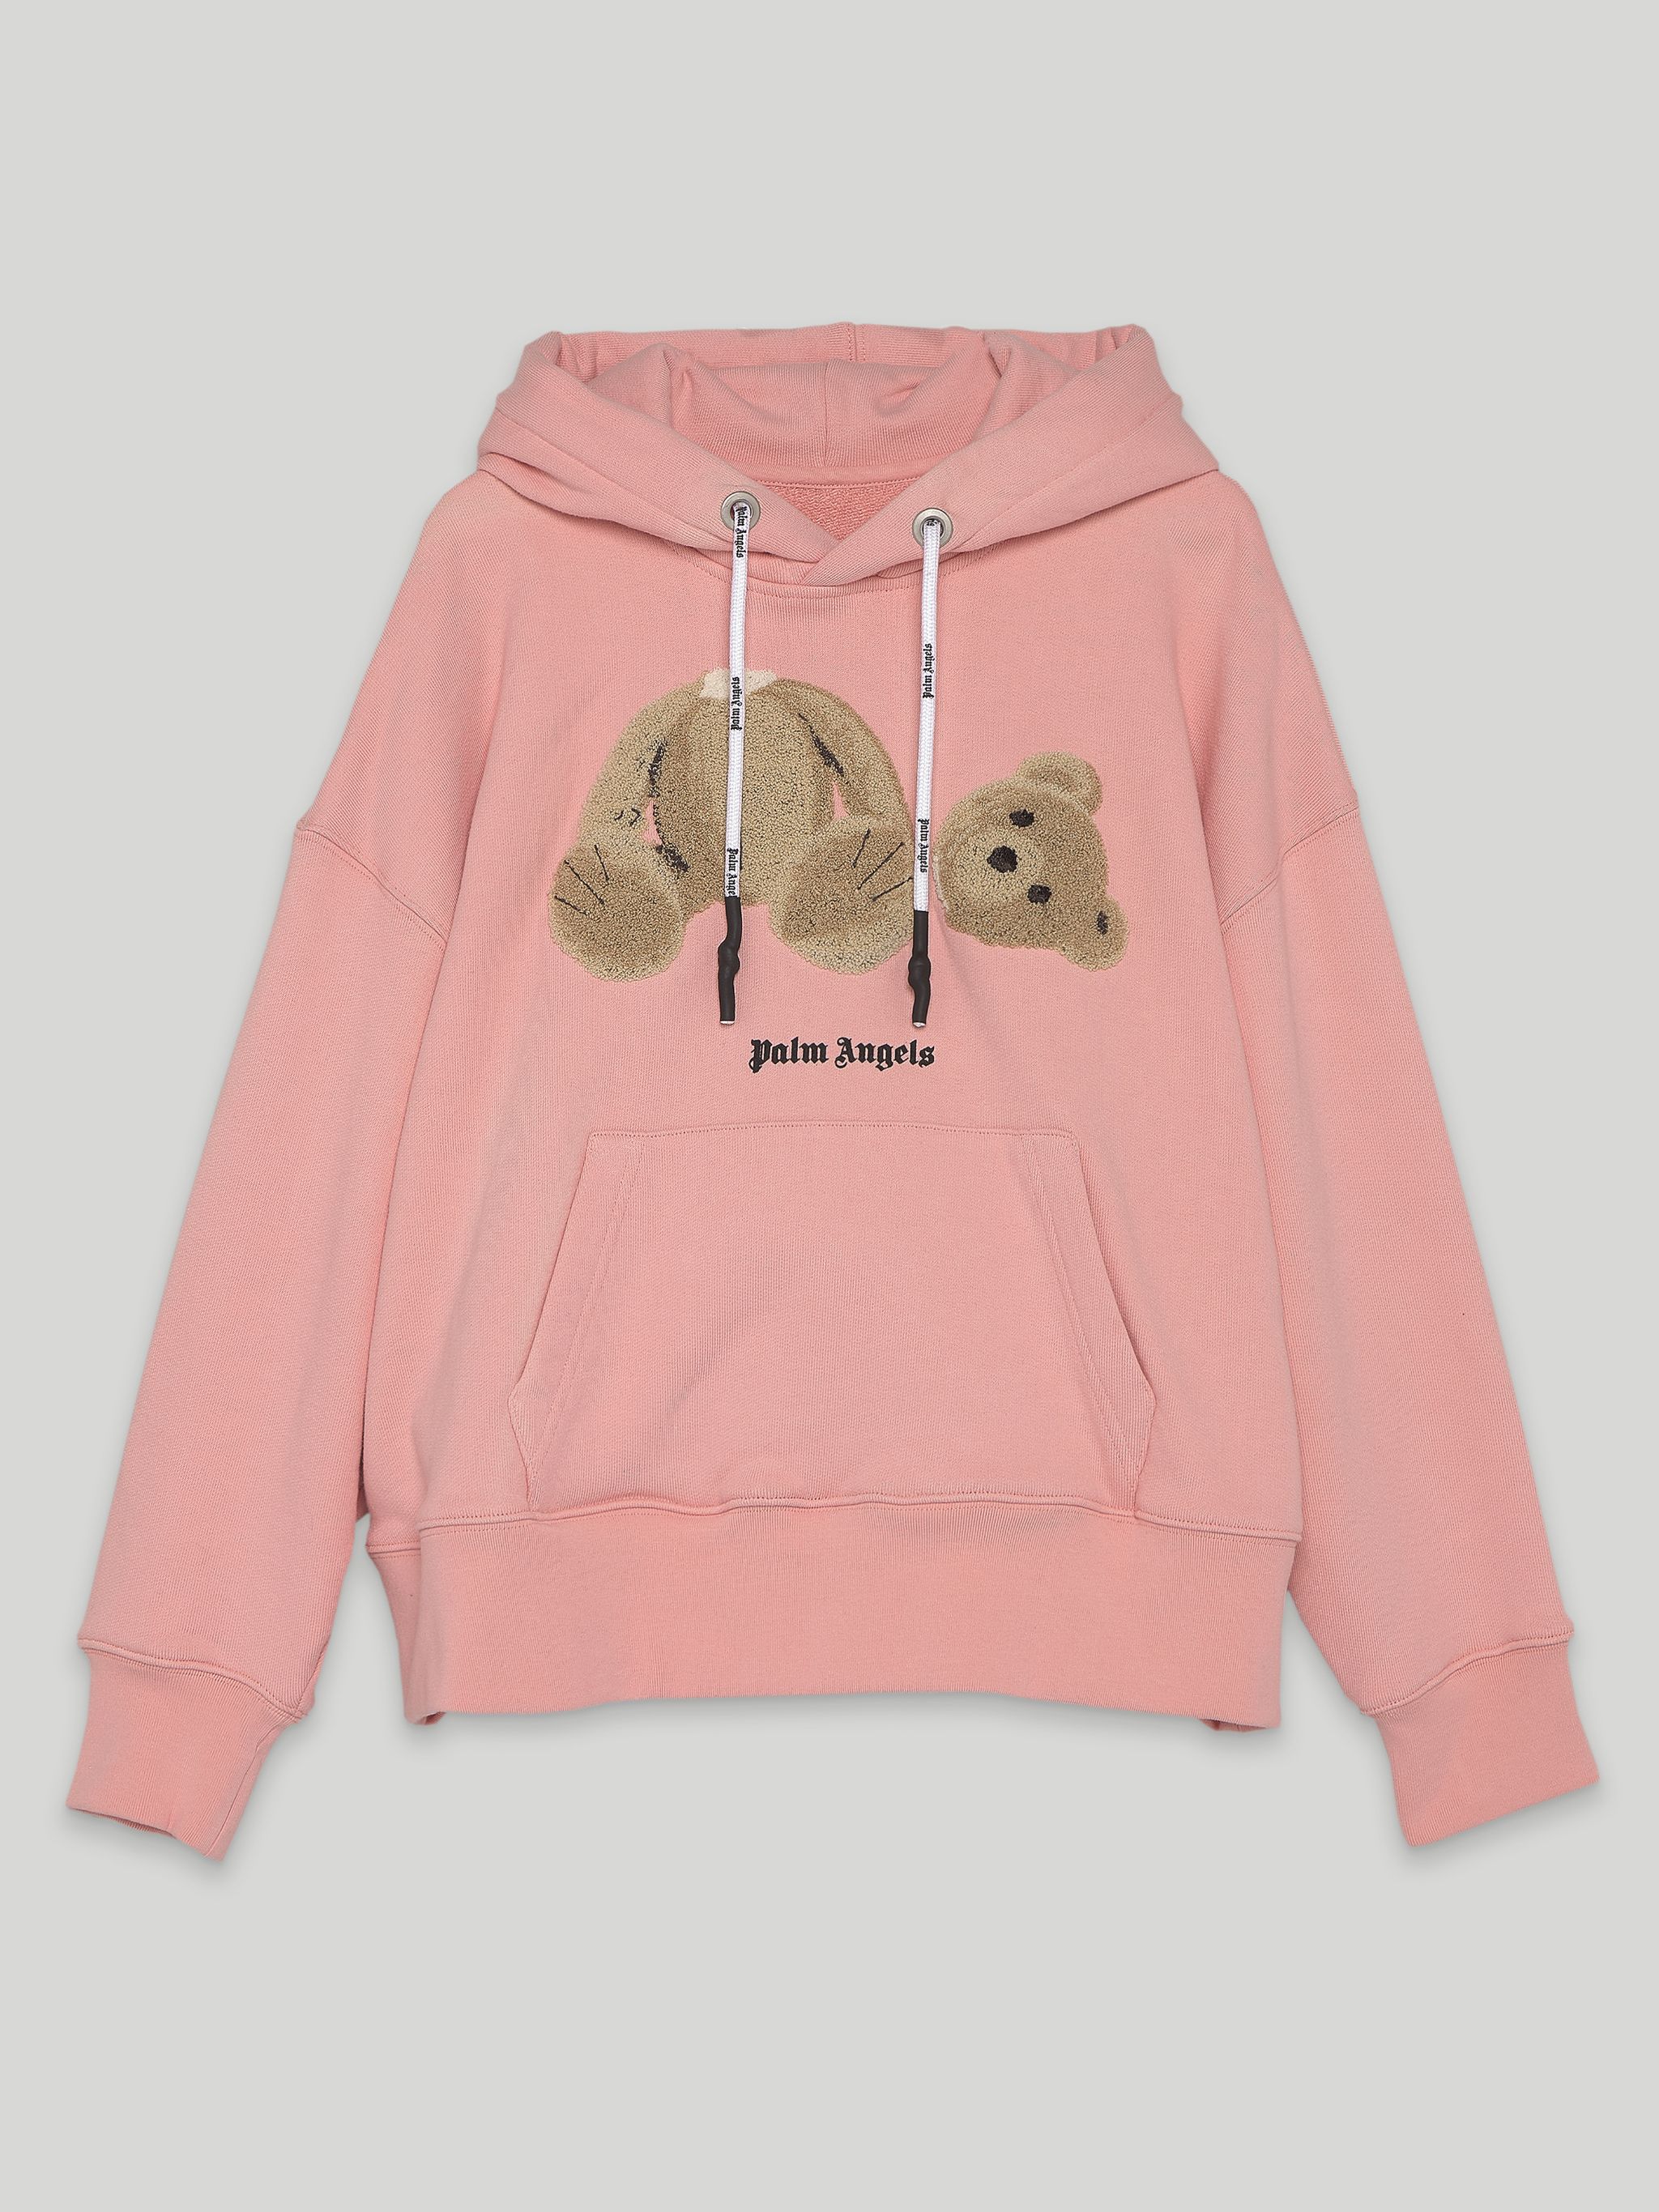 Palm Angels Bear Over hoodie in pink - Palm Angels® Official